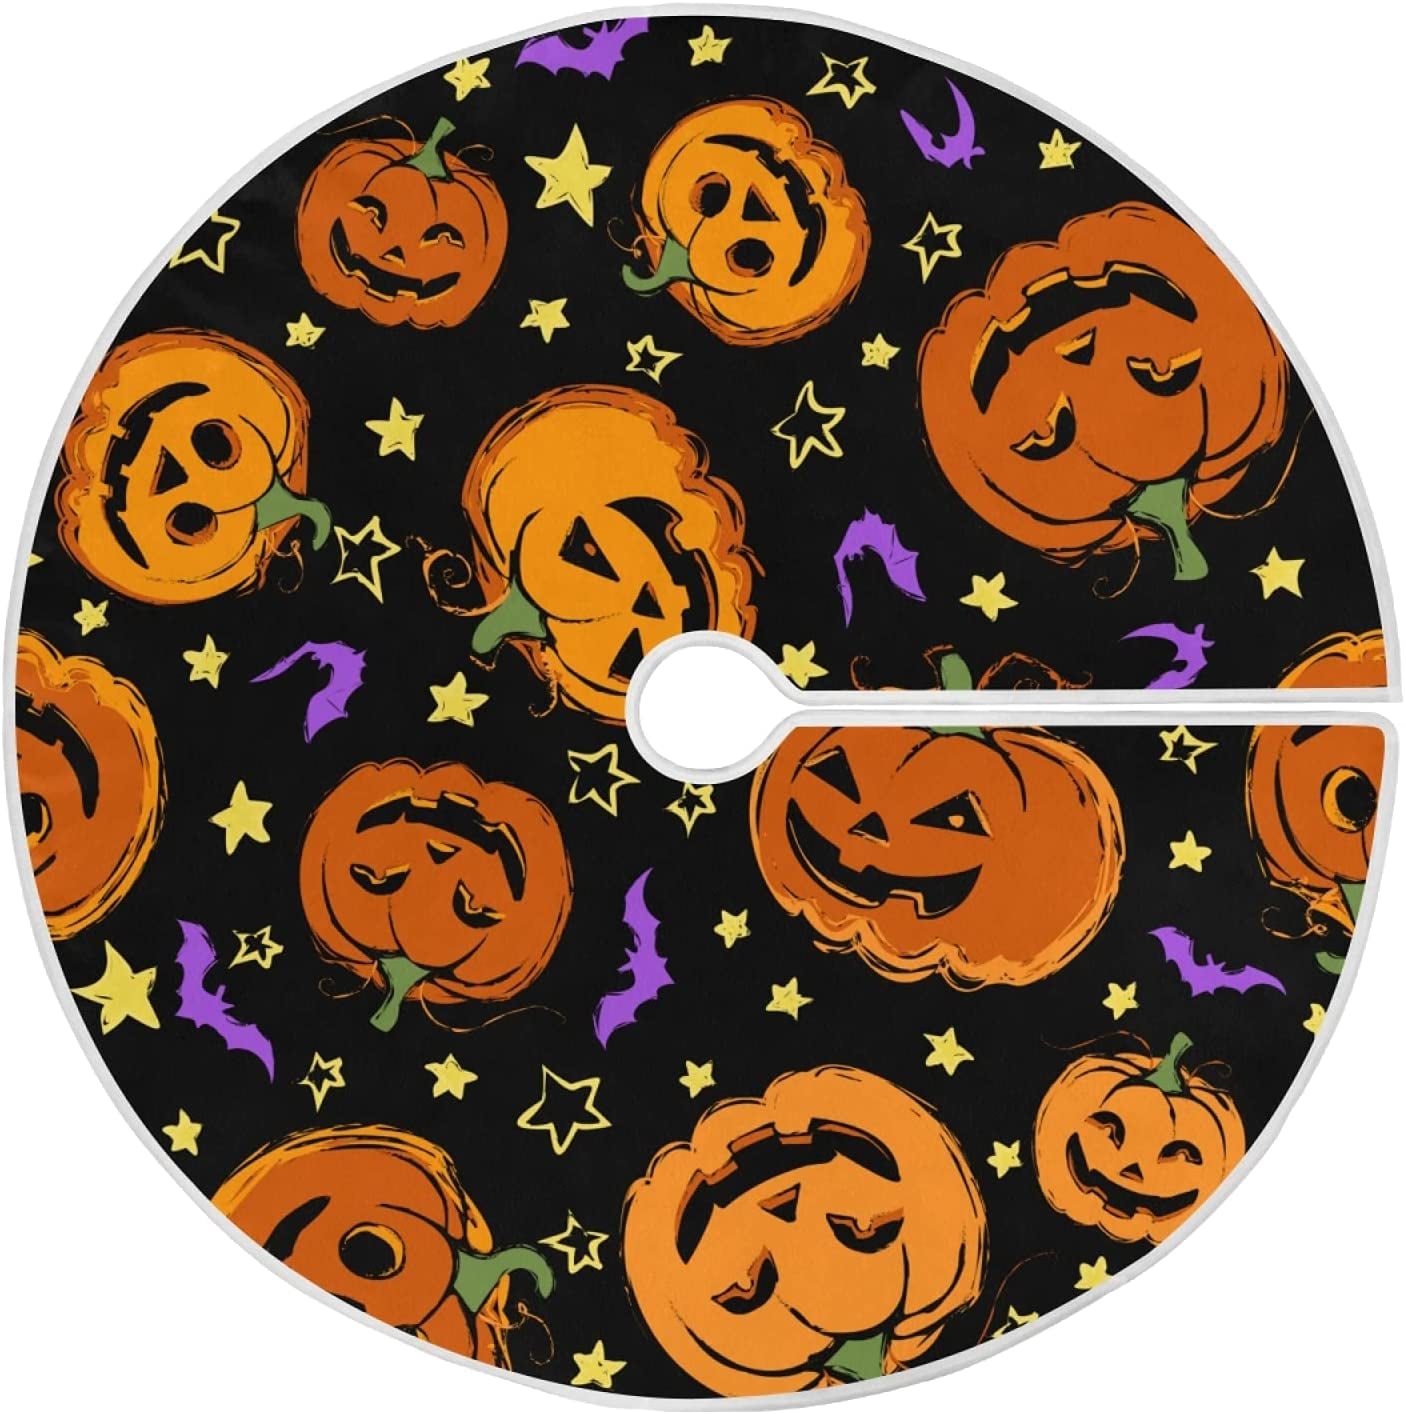 ALAZA Halloween Tree Skirt Decoration,Small Mini Tree Skirt Ornament 35.4 Inch with Spooky Halloween for Halloween Party Holiday Home Decorations